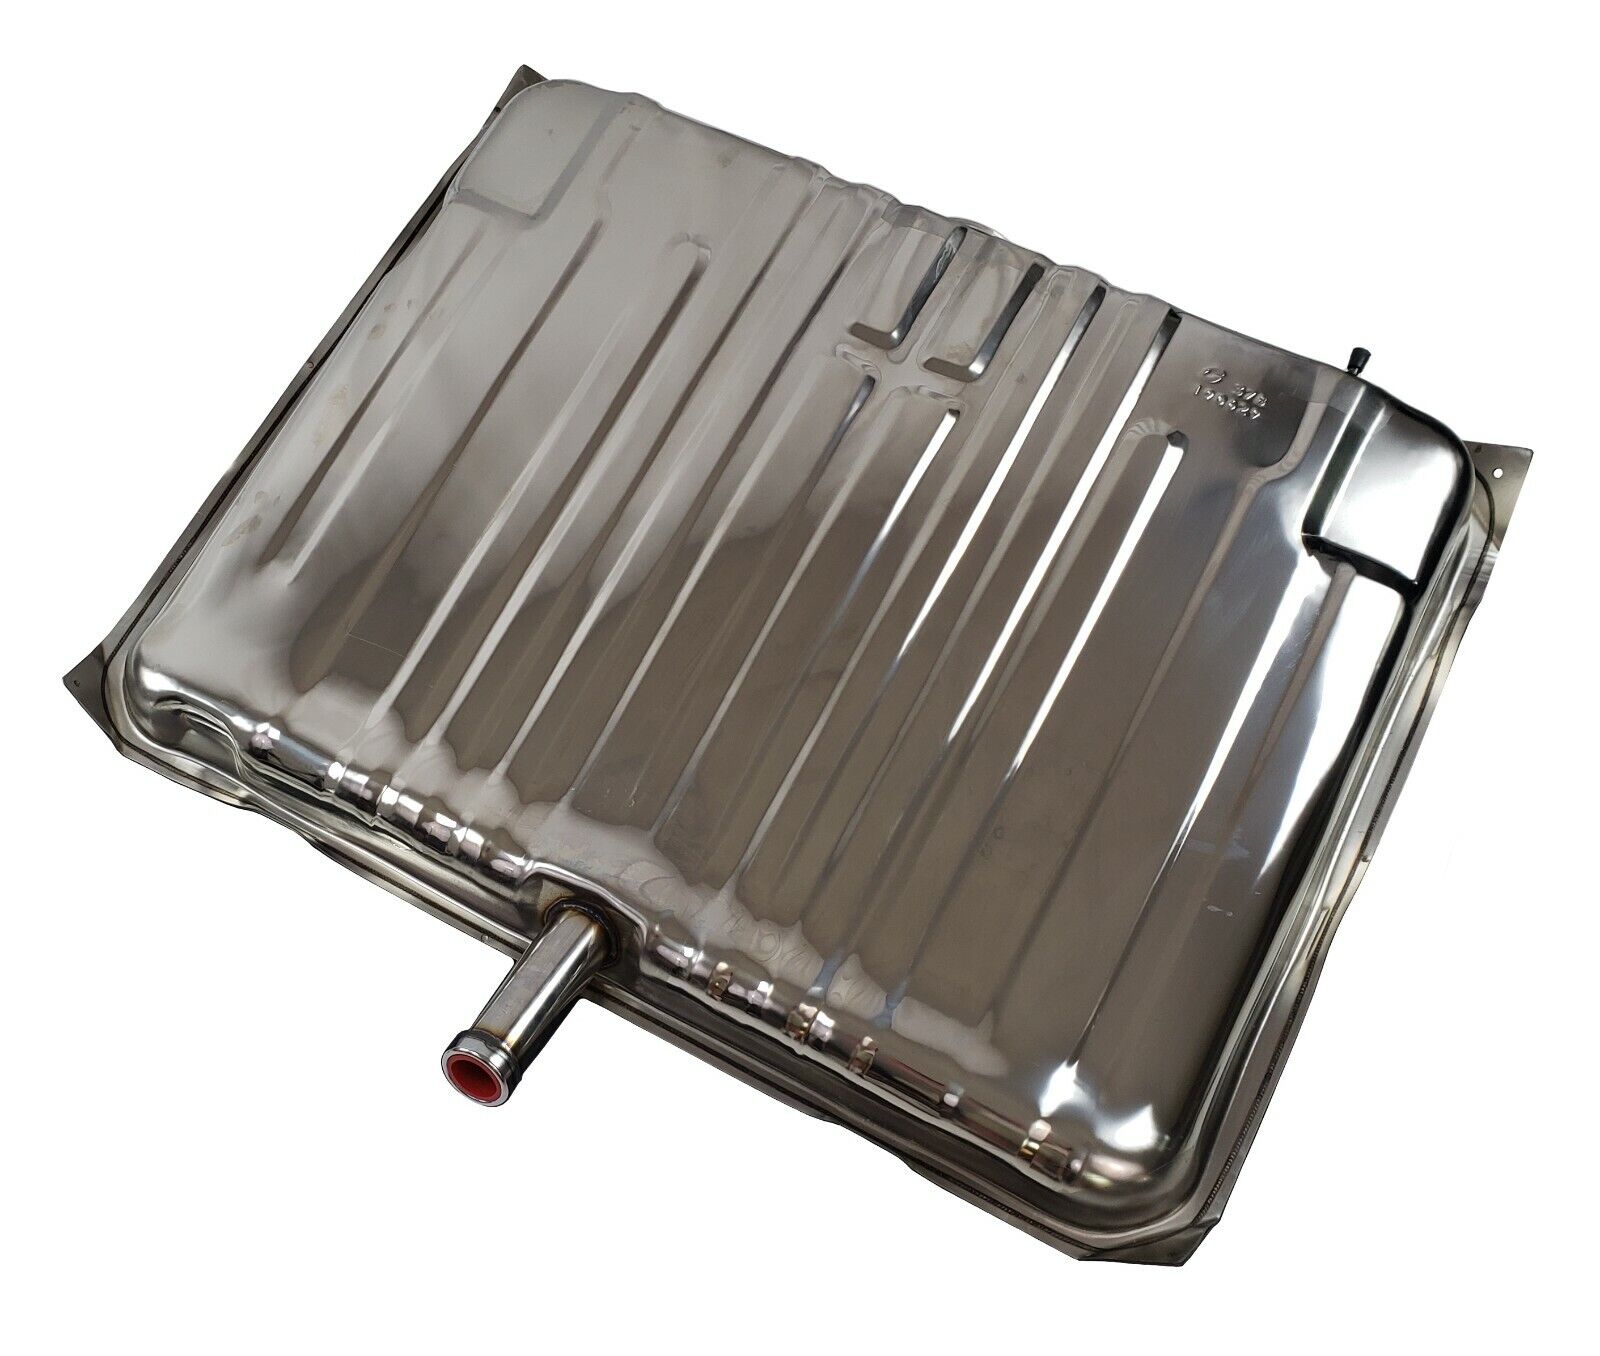 Stainless steel gas tank for 65 66 Chevrolet Impala BelAir Biscayne